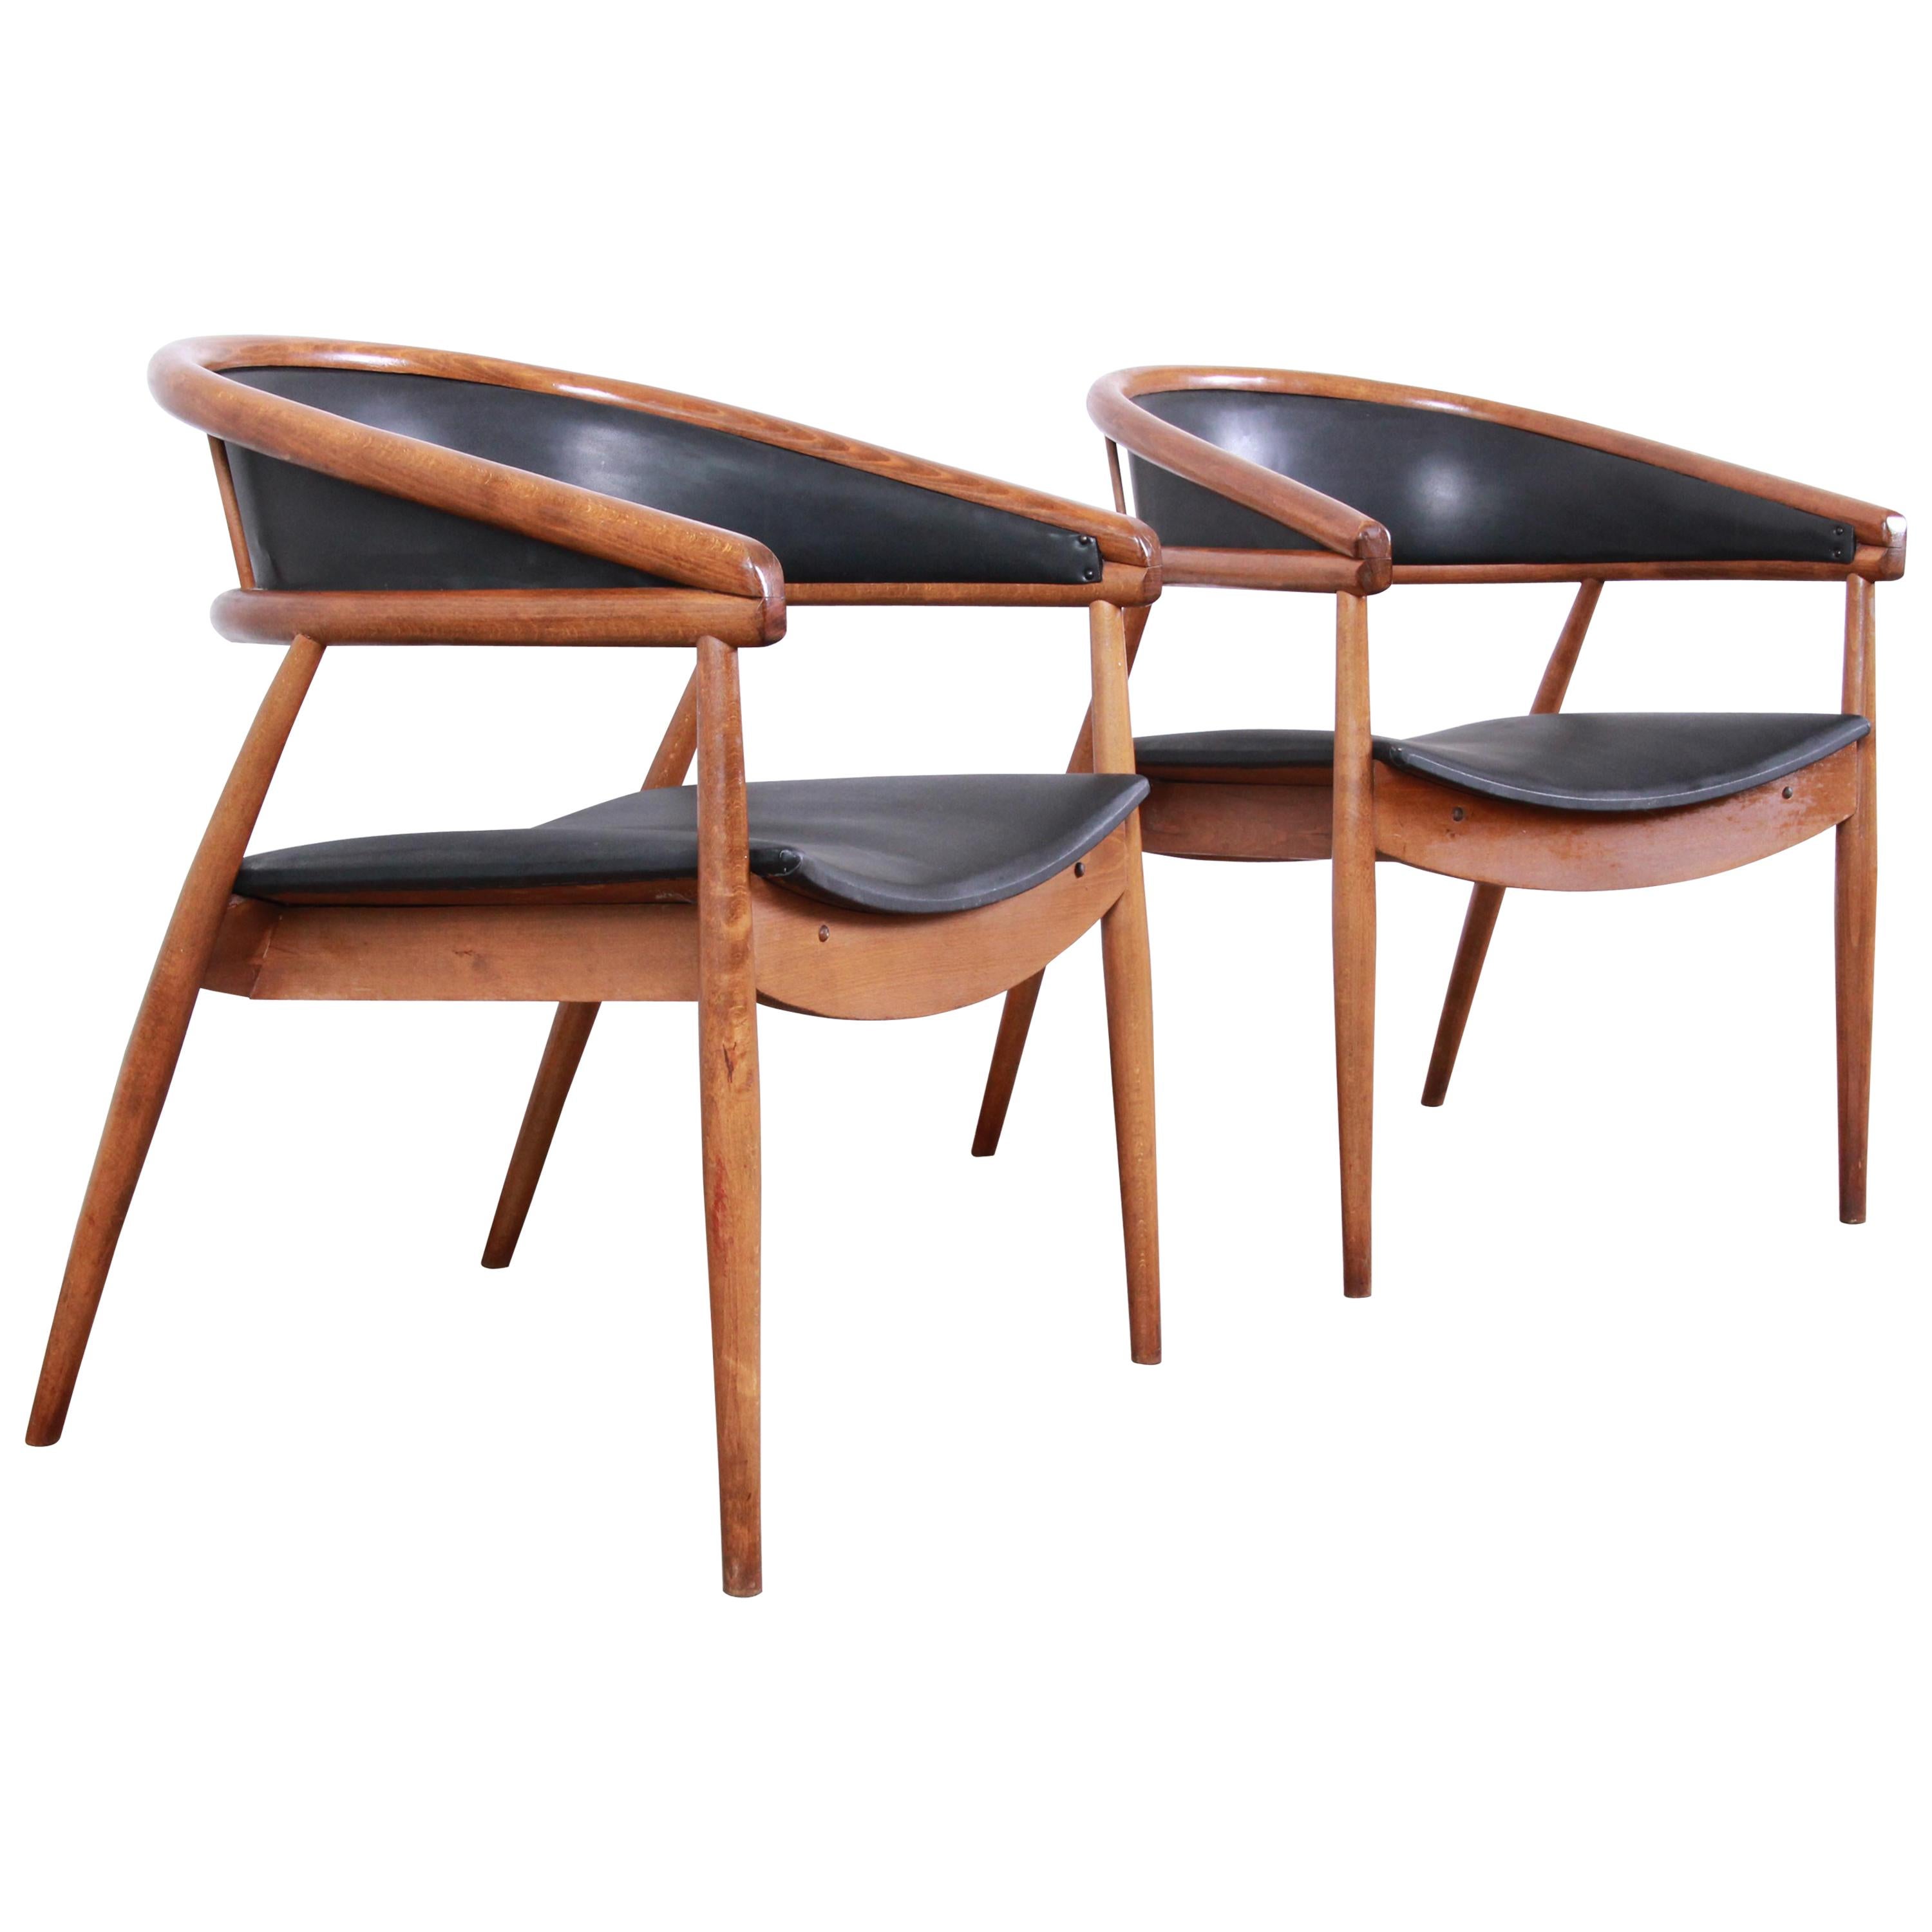 James Mont Style Mid-Century Modern Bentwood Club Chairs, Pair